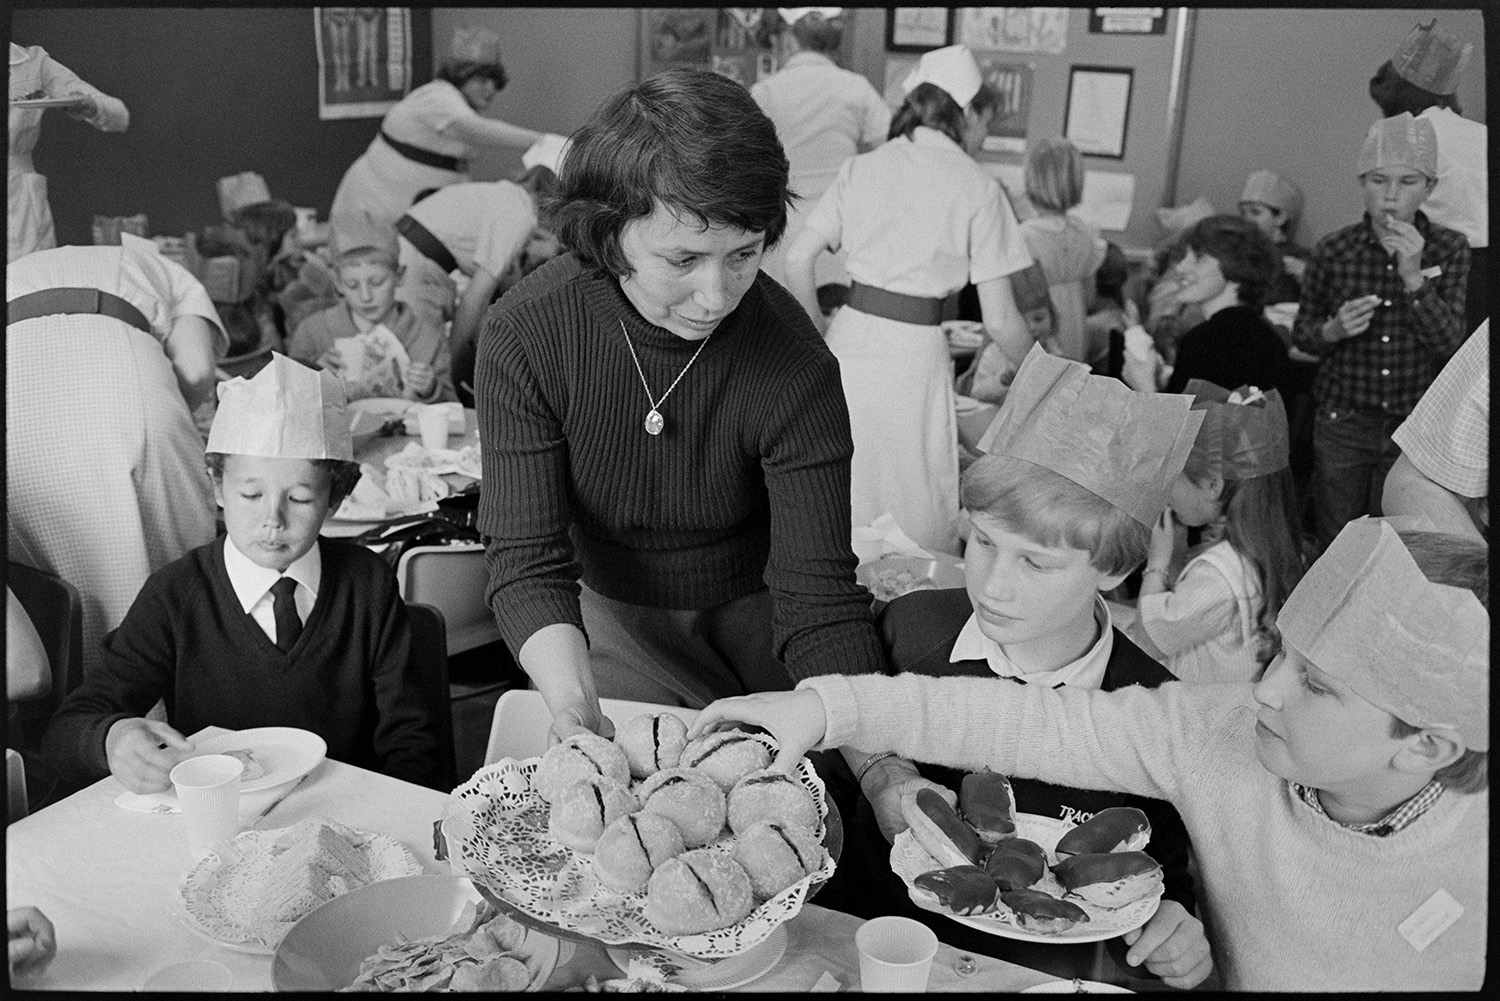 Party in children's ward of Hospital, food and drink served by nurses, buns, cakes. <br />
[A woman serving cakes to three boys at a party on the Children's ward at Barnstaple General Hospital. Other children can be seen in the background and some of them are wearing paper hats.]